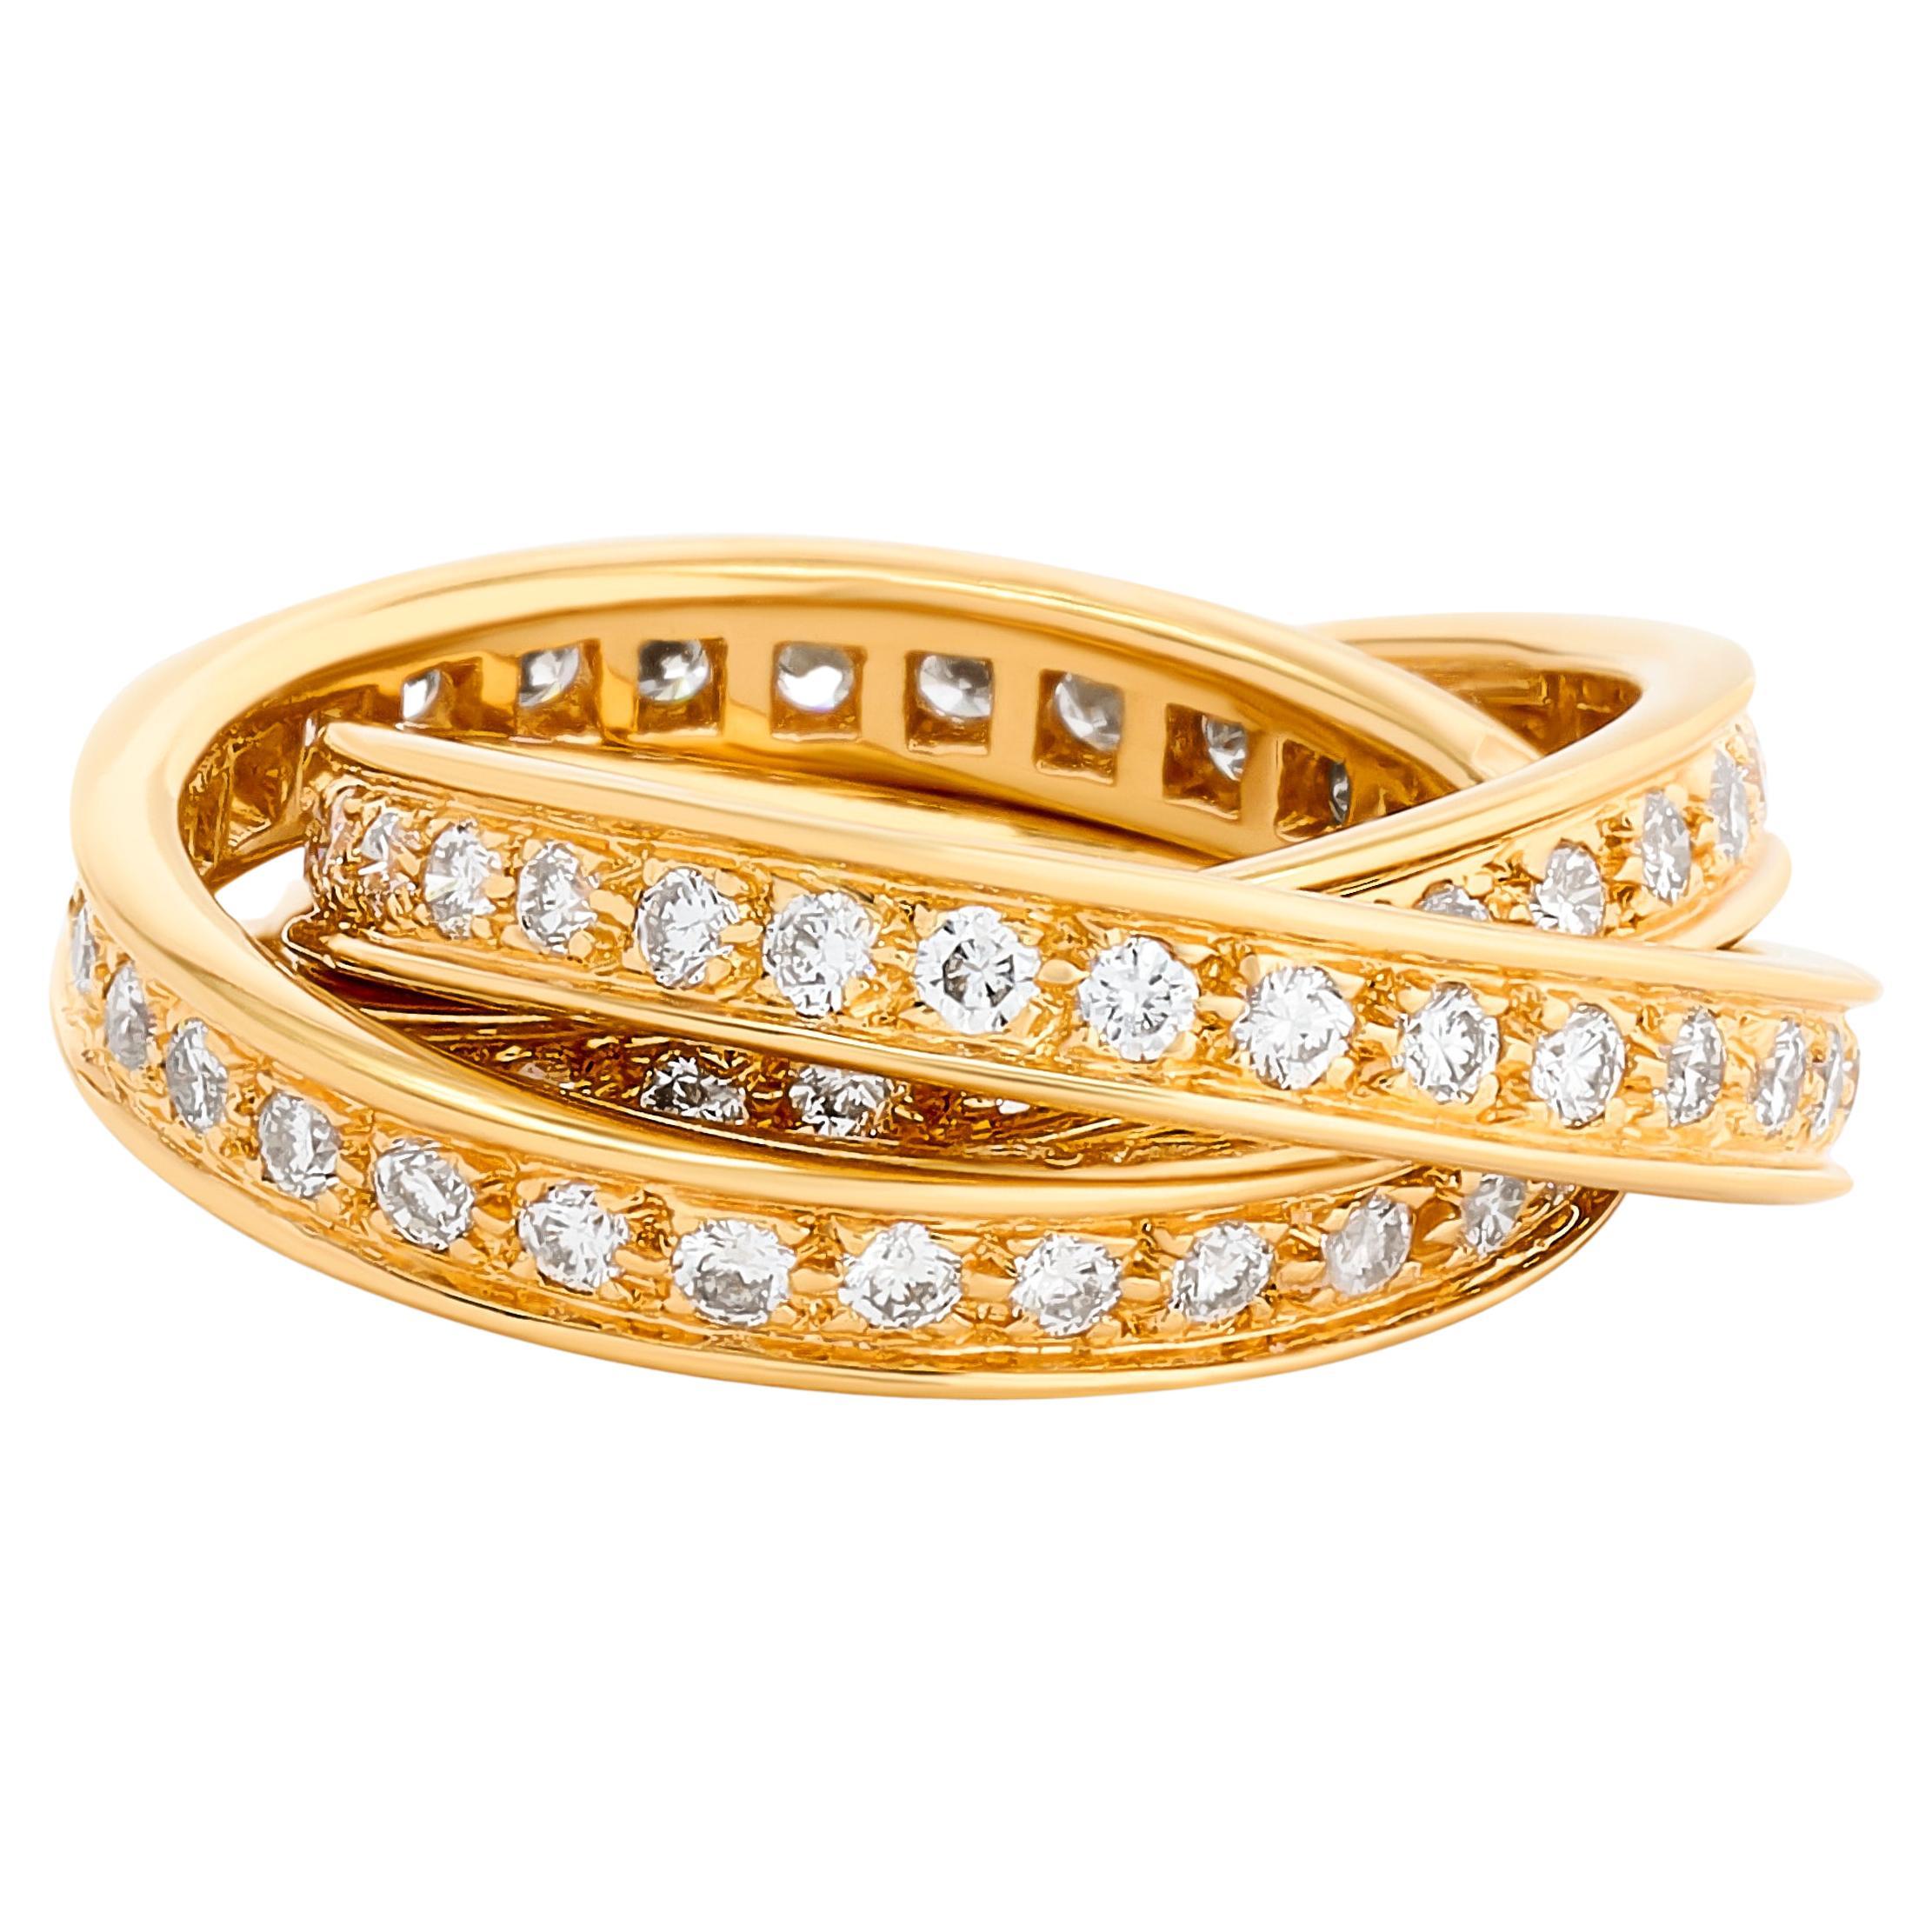 Cartier Classic Model Diamond Trinity Rolling Ring in 18k Yellow Gold For Sale